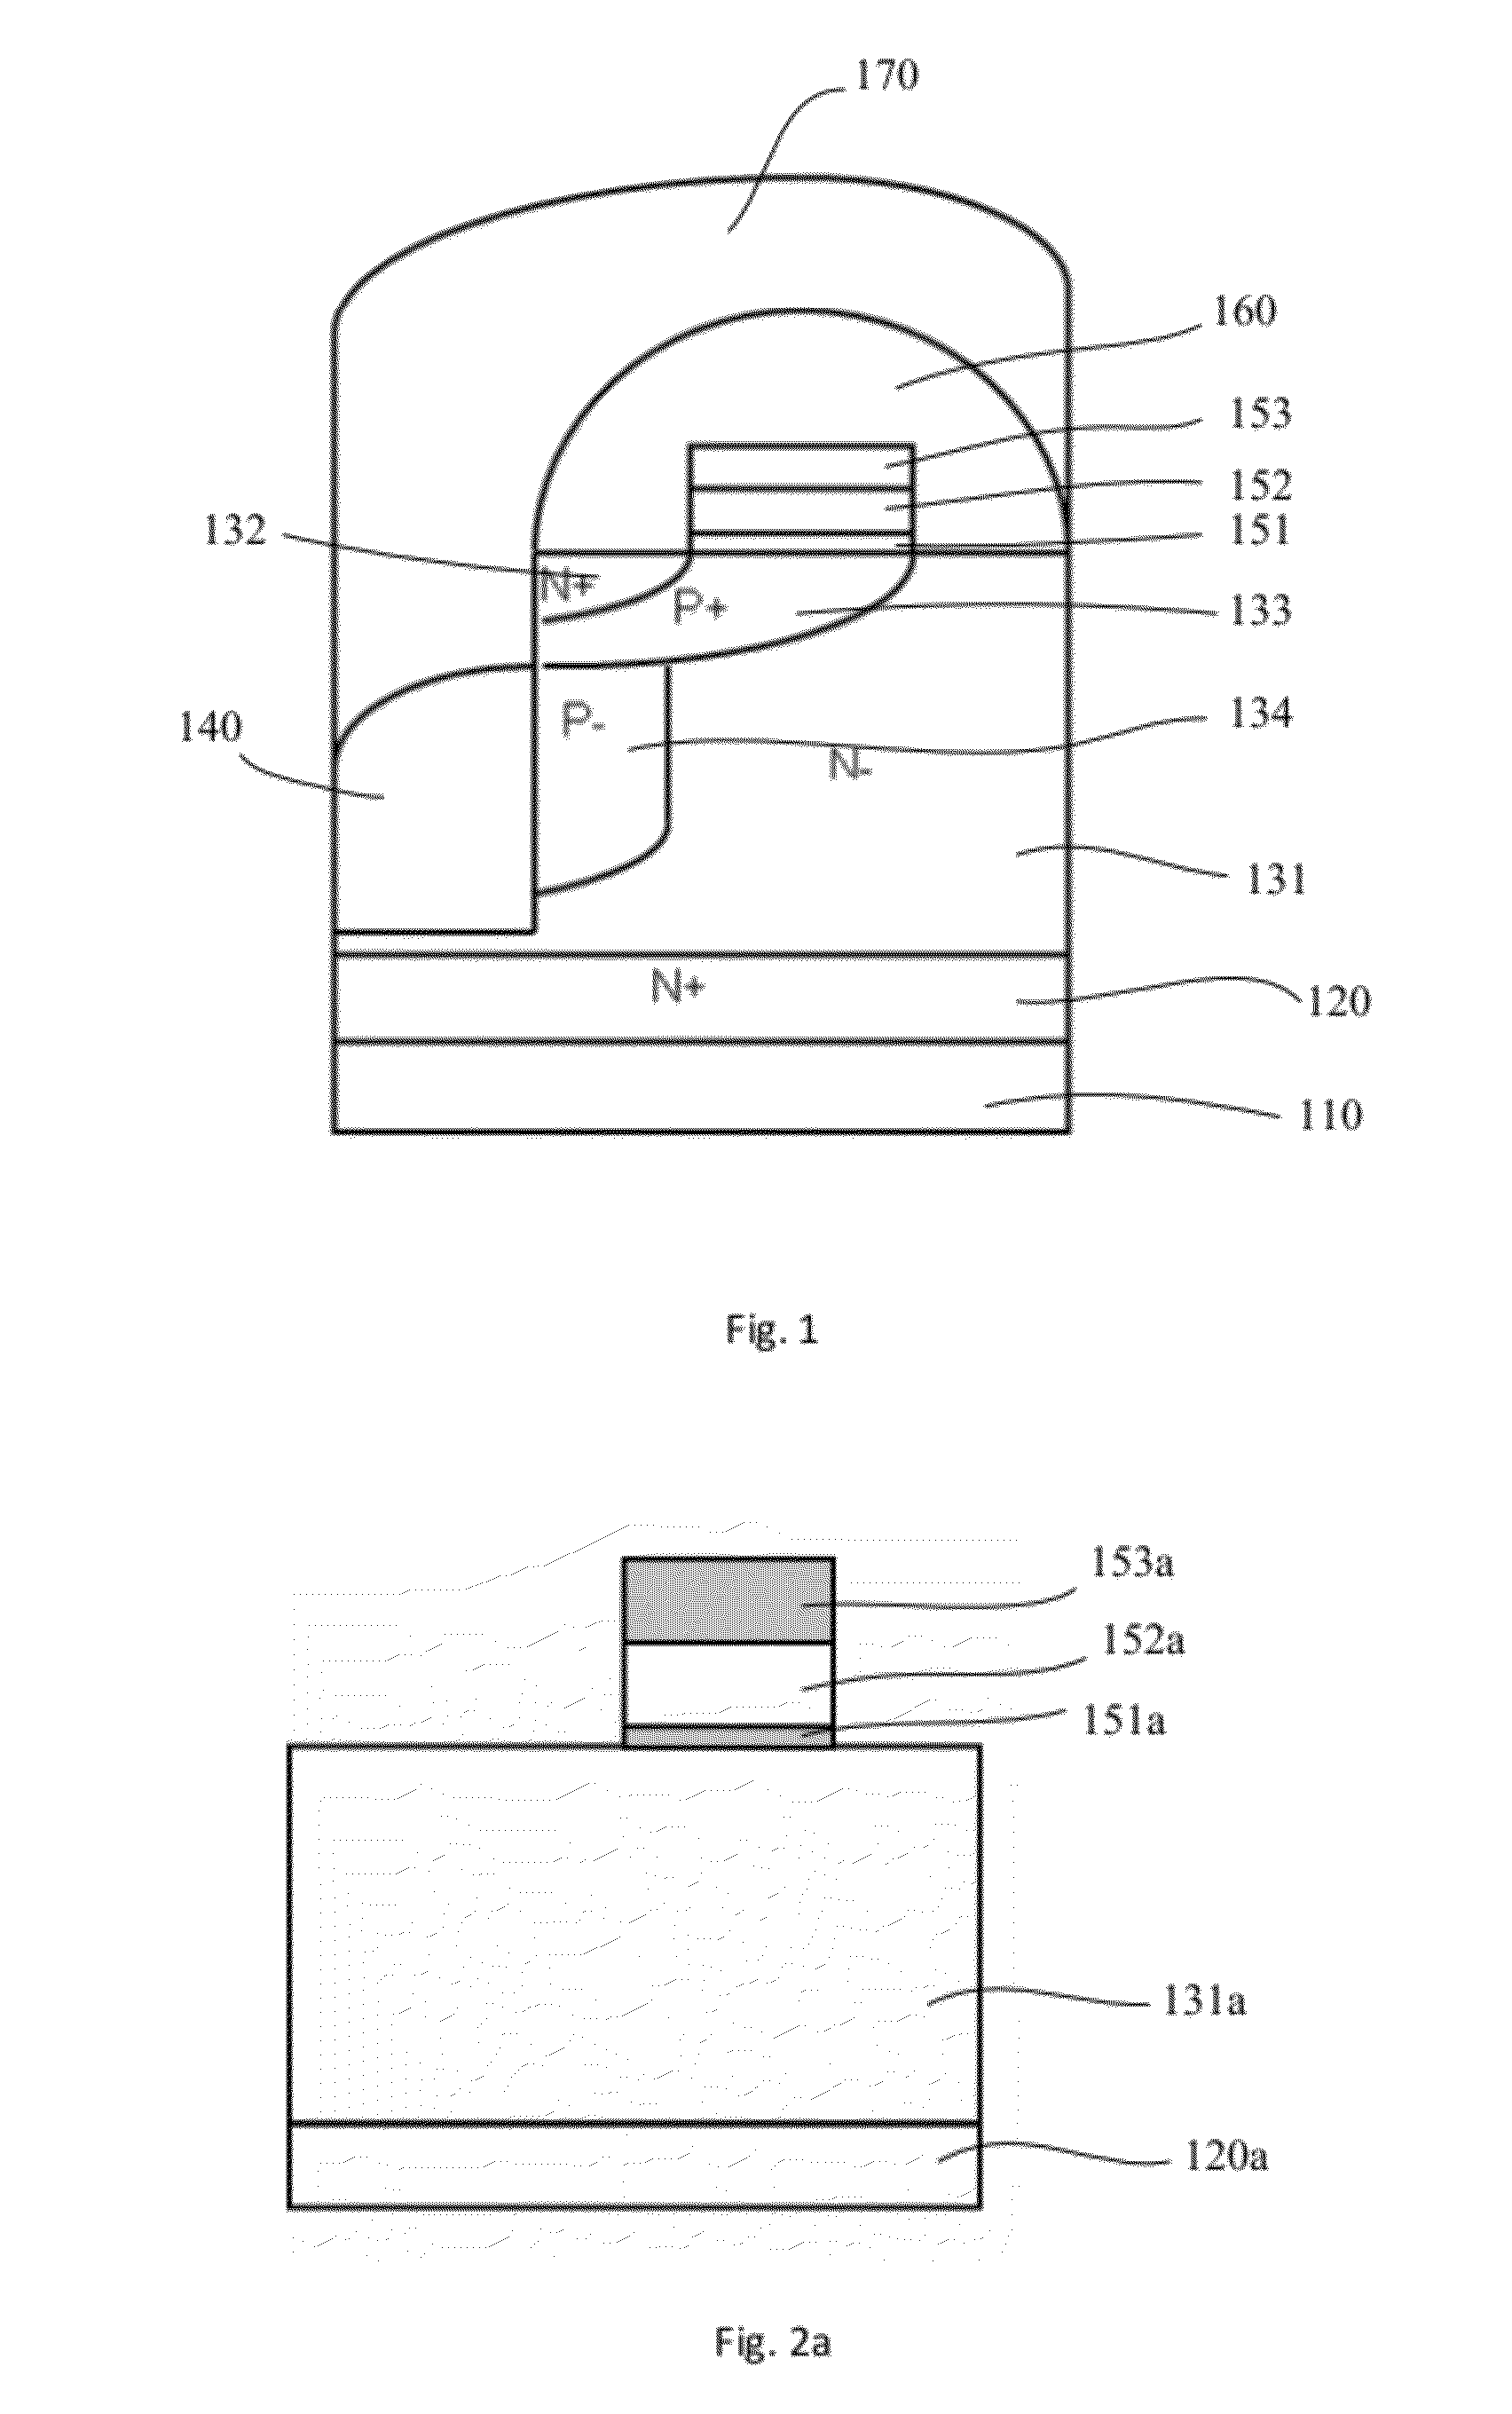 Structure and fabrication process of super junction mosfet